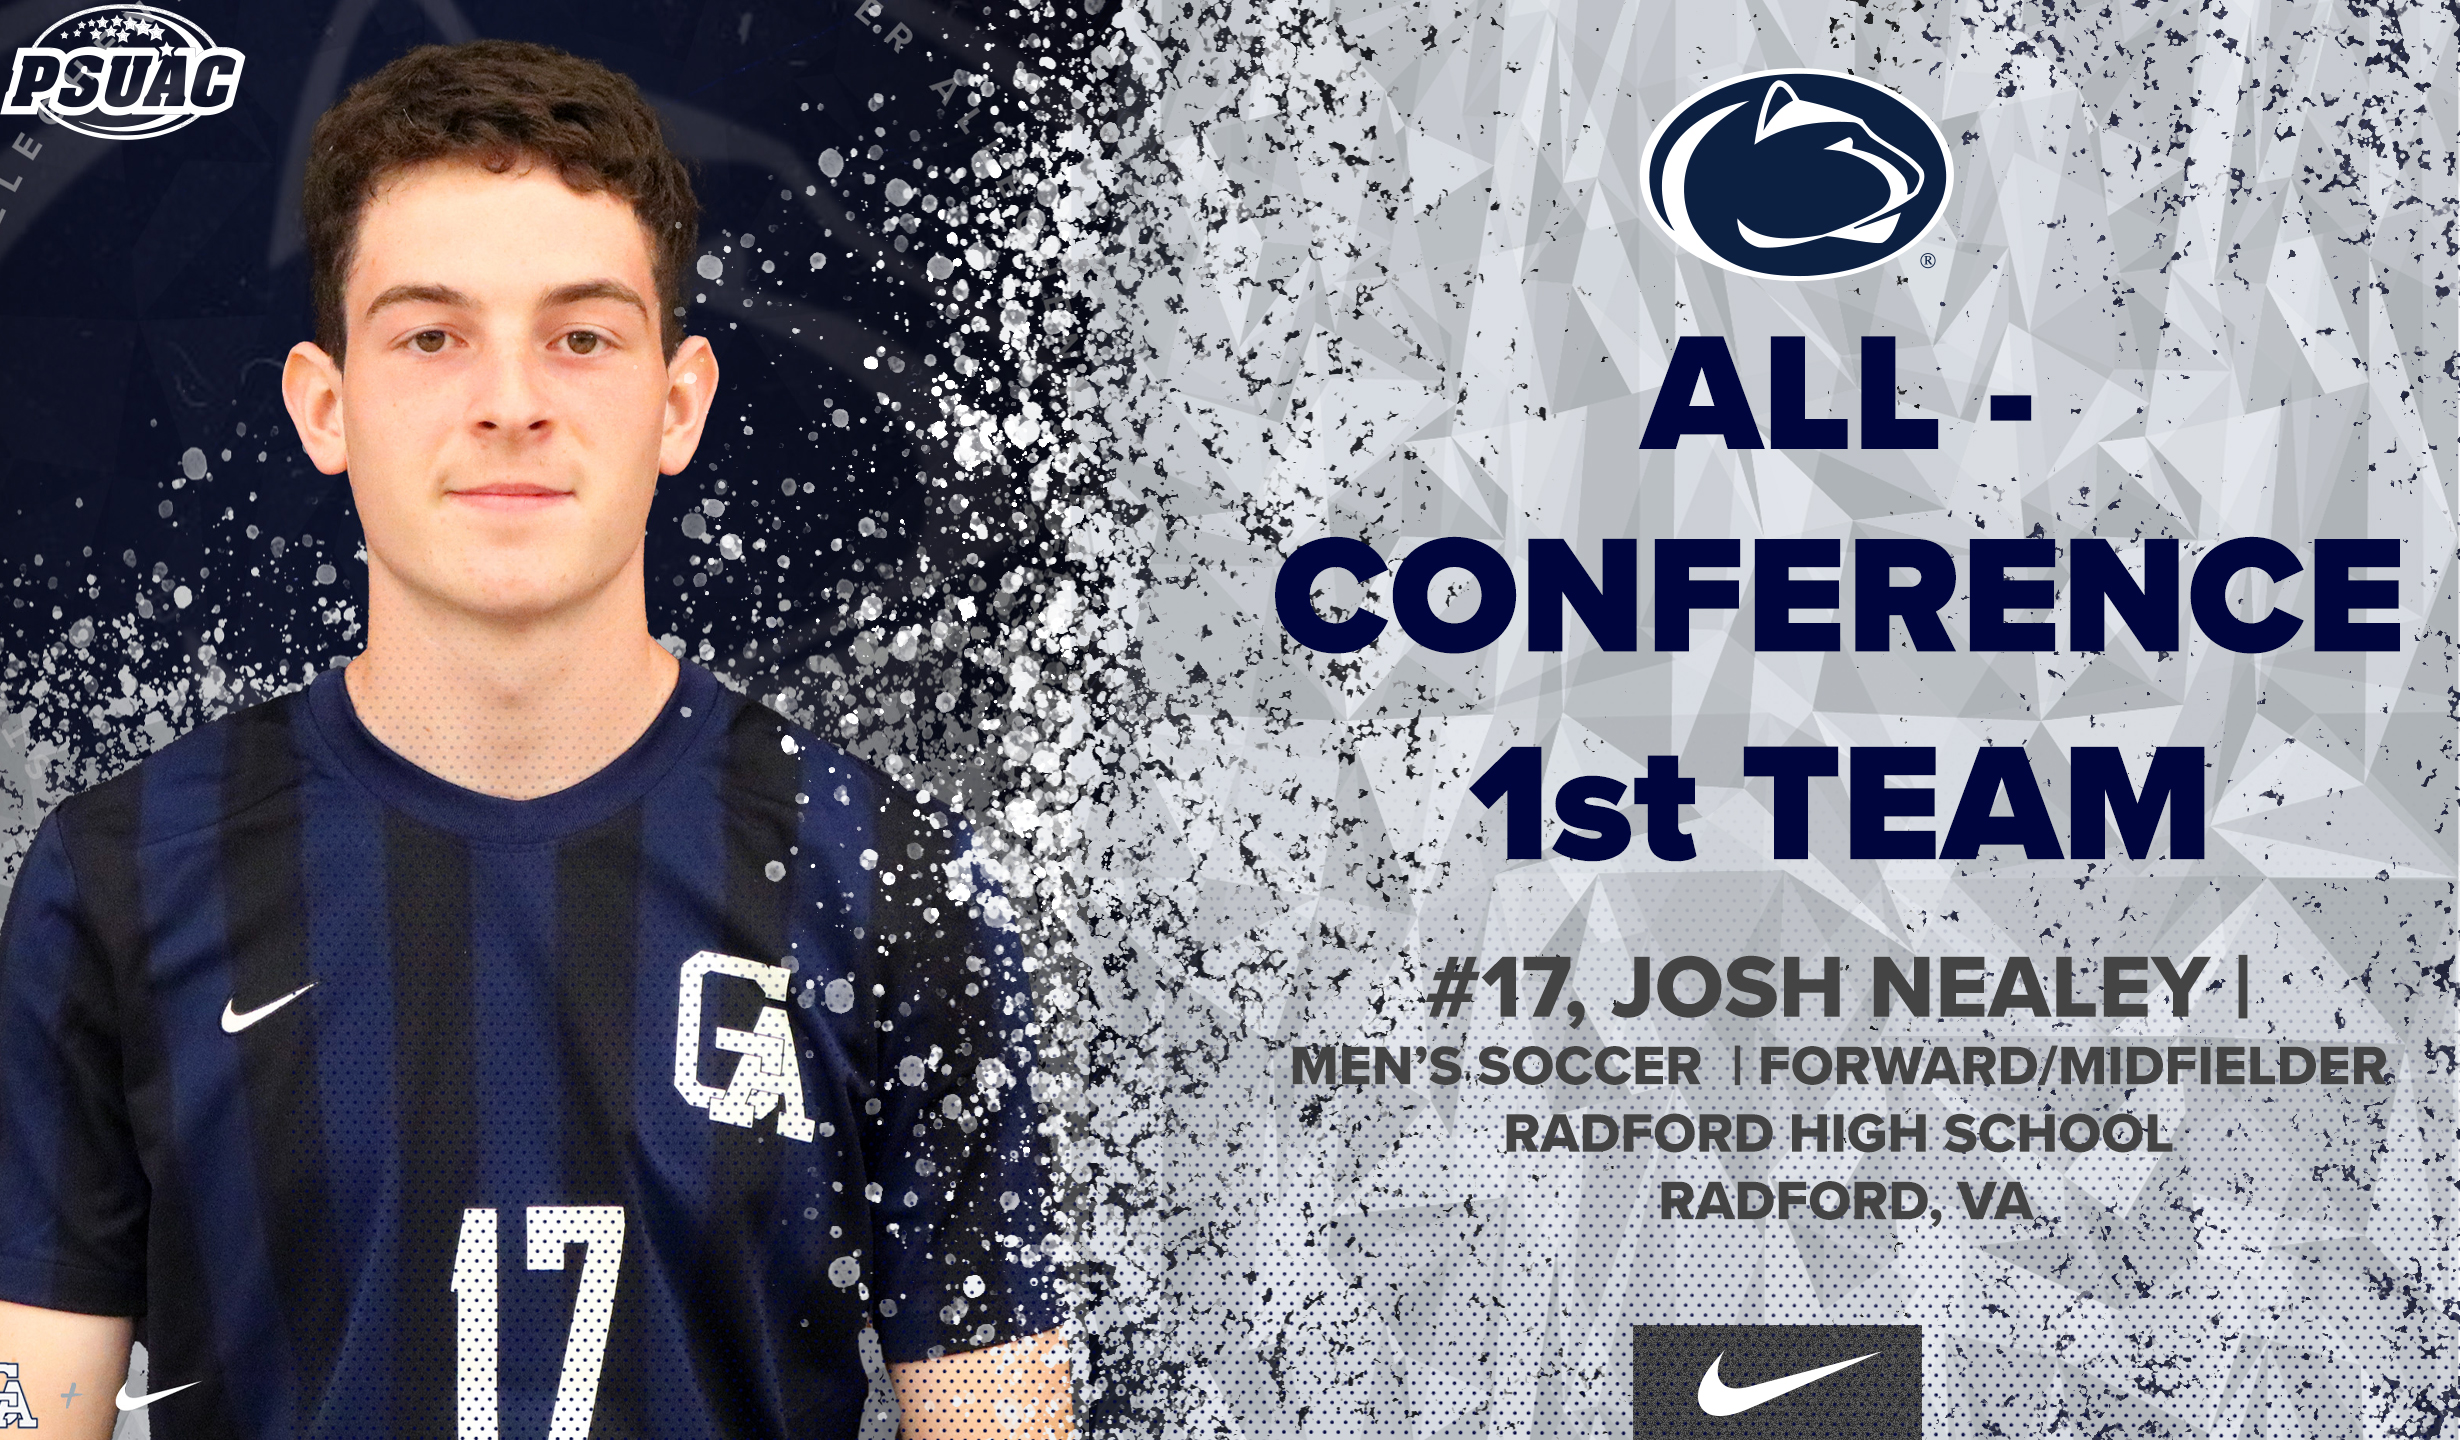 Nealey Goes 1st Team All PSUAC, 5 Others Honored